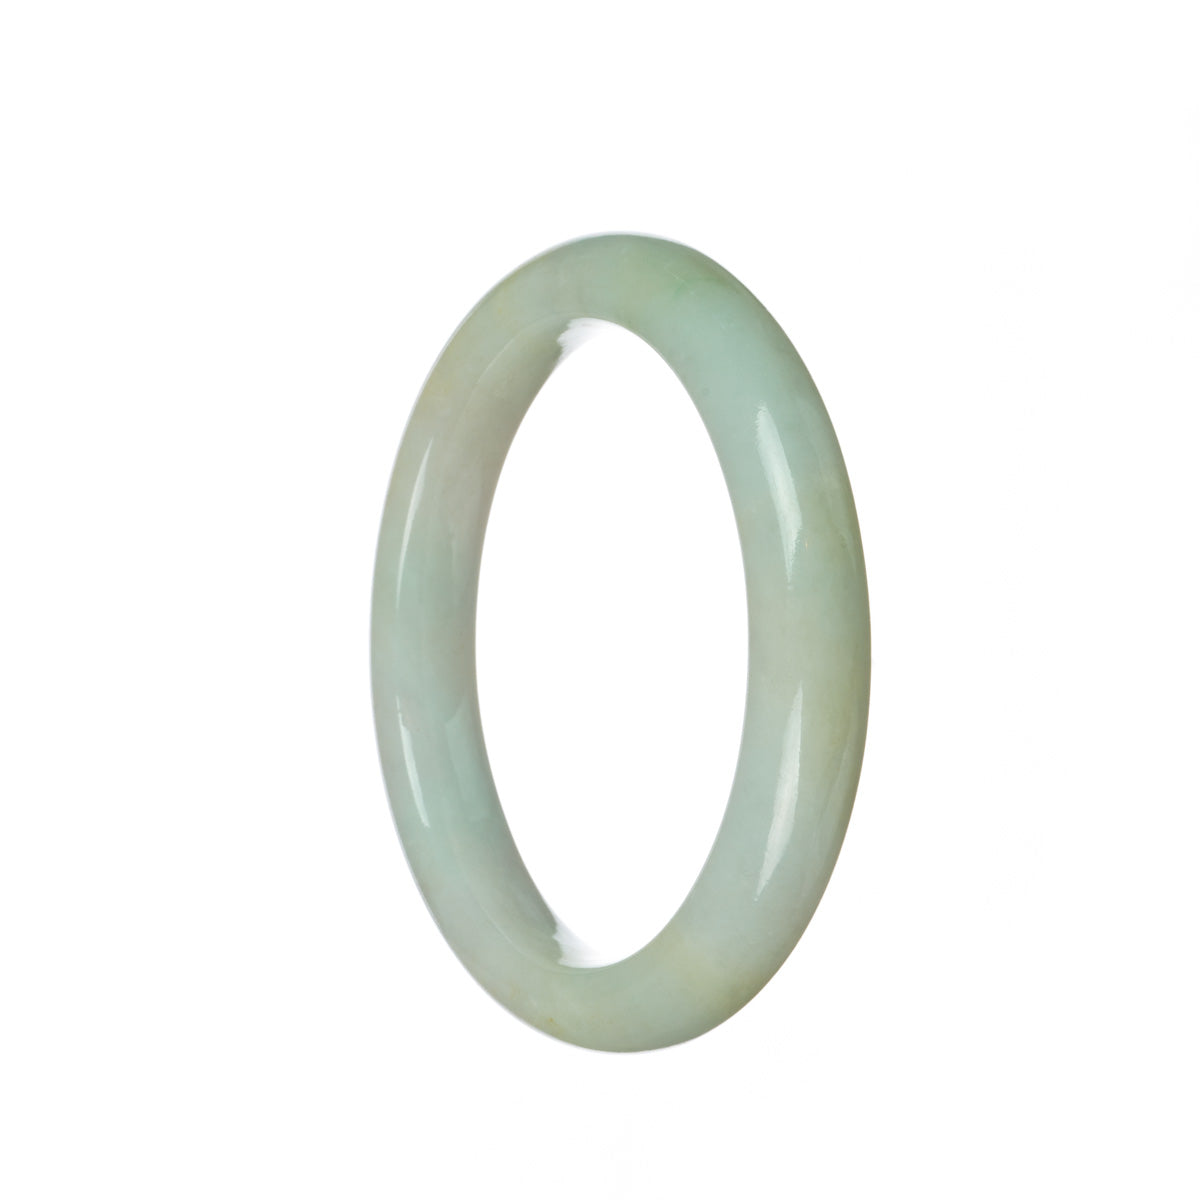 A beautiful, pale green Burma Jade bracelet with an authentic Grade A quality. The bracelet features a 59mm half moon design, adding a touch of elegance to any outfit. Created by MAYS, a trusted brand known for their high-quality jade jewelry.